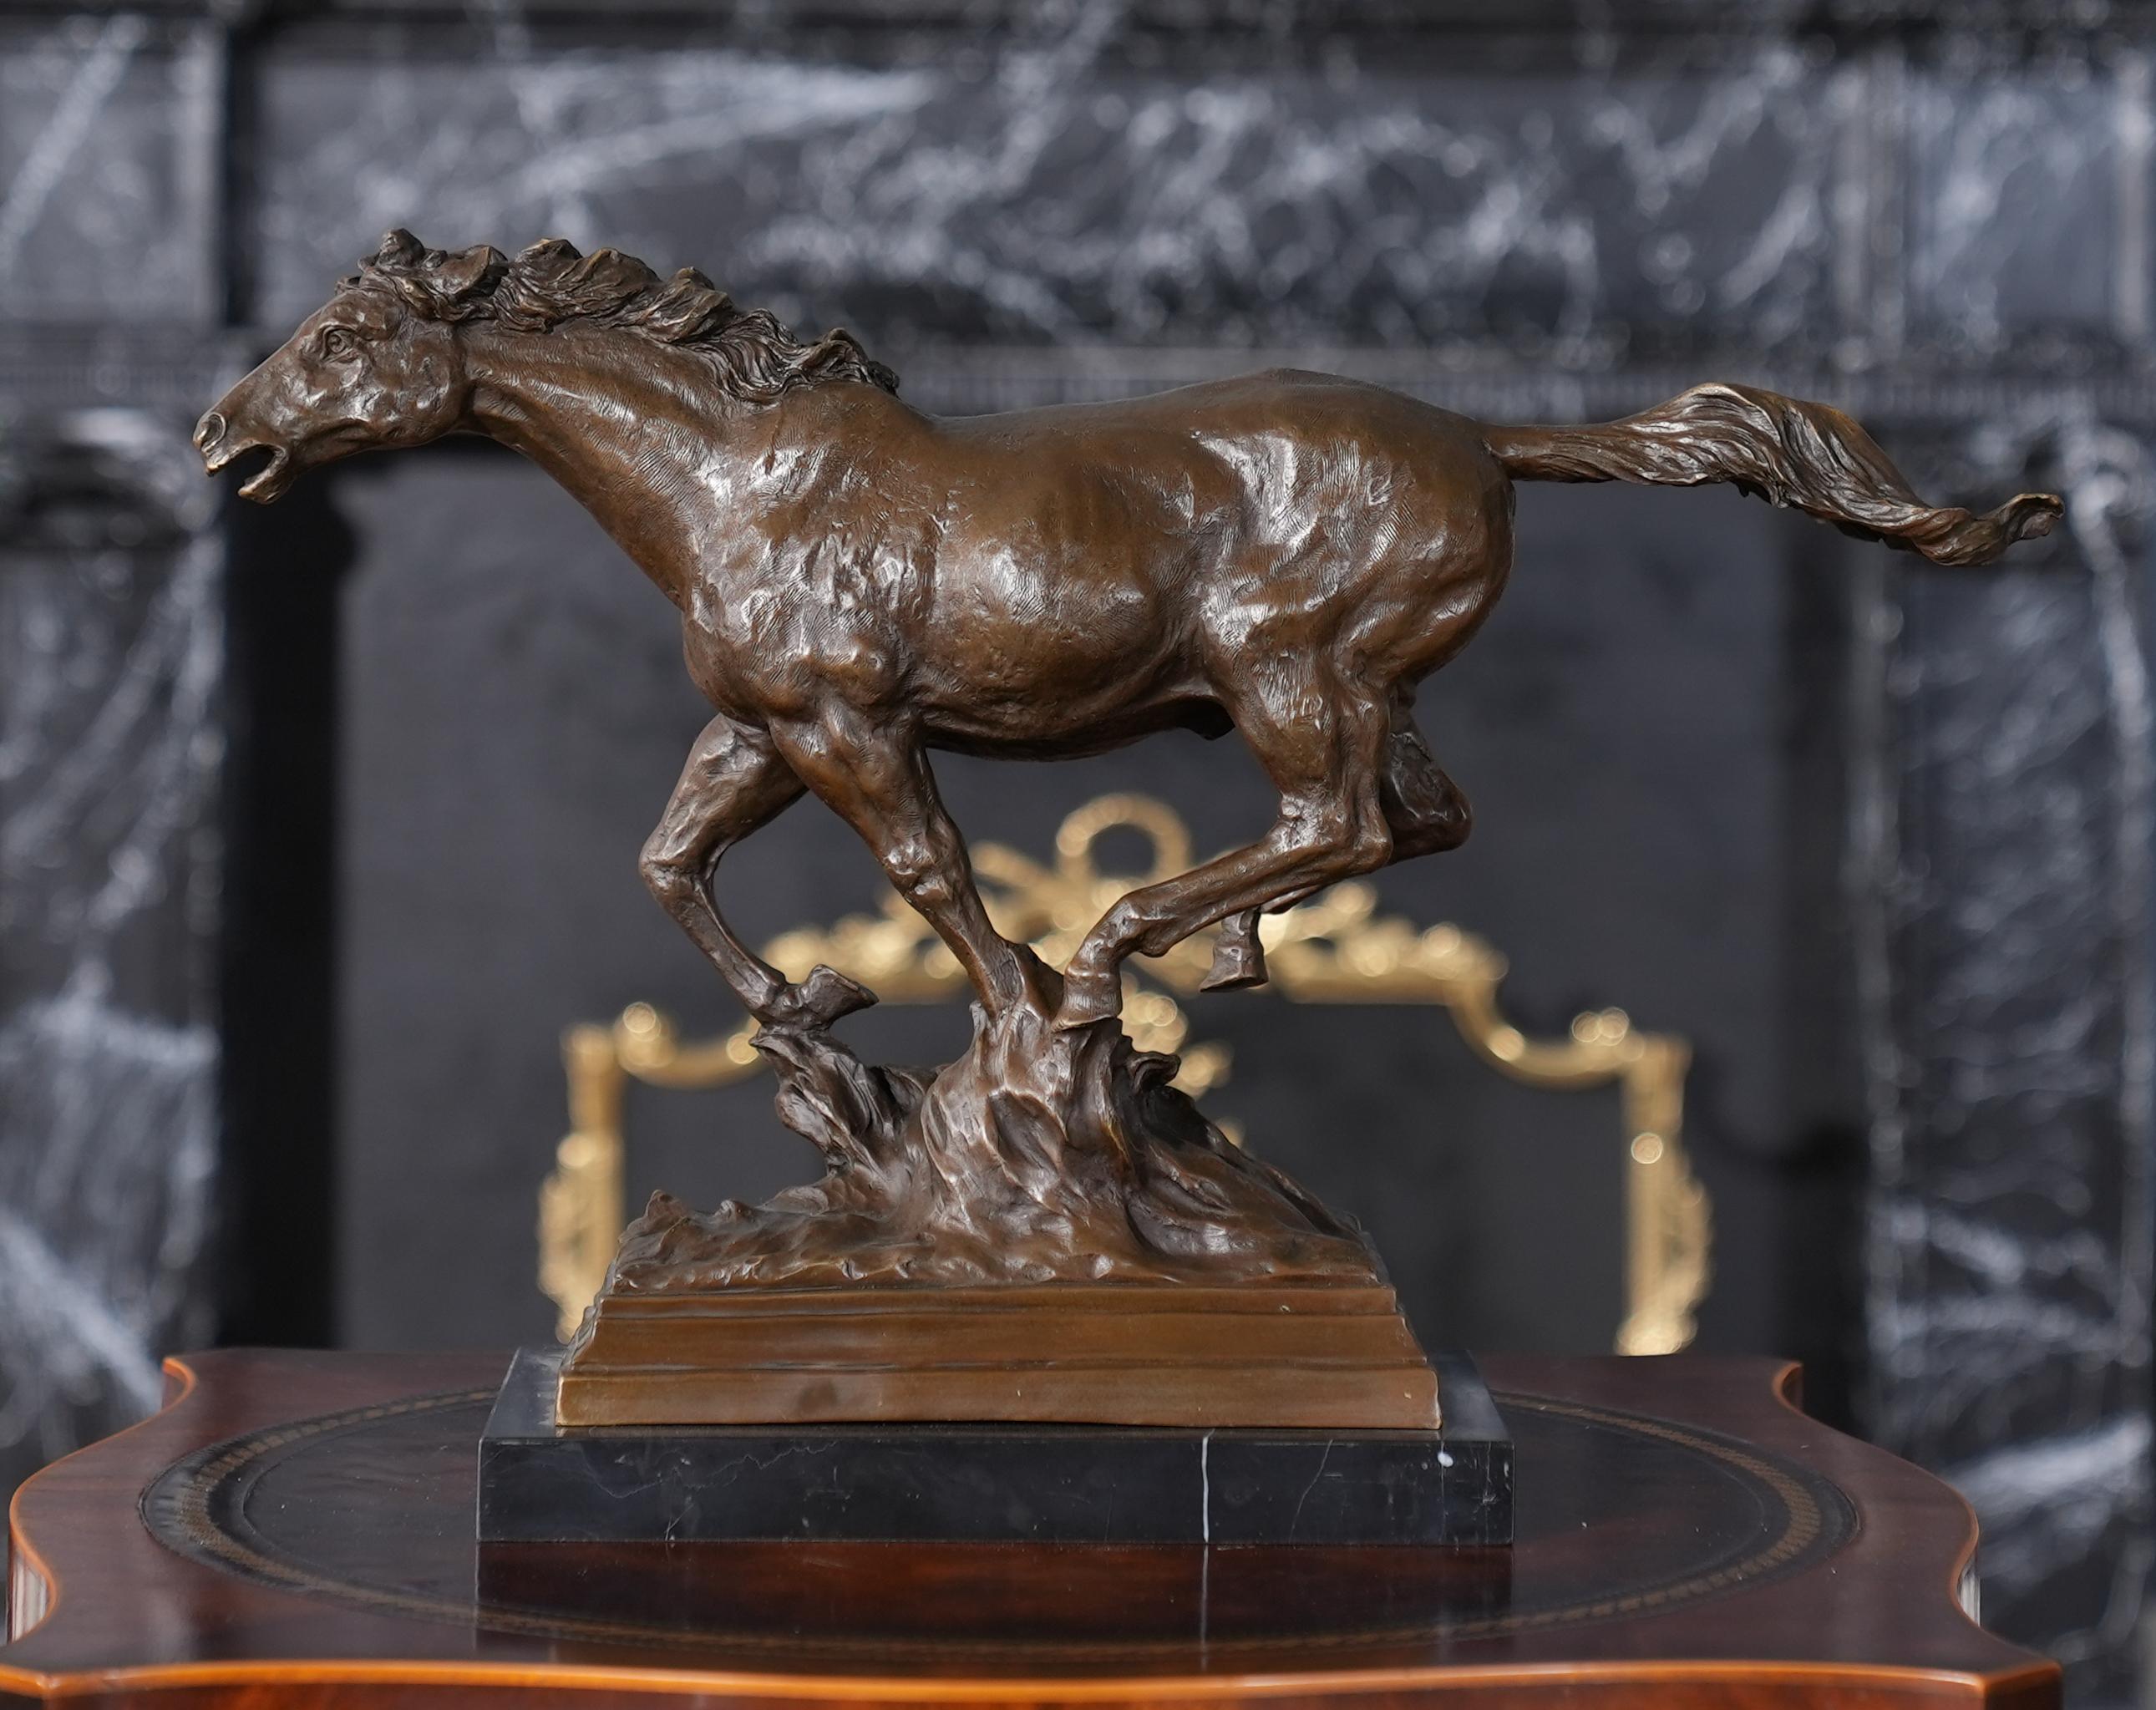 Graceful even when standing still the Running Horse on Marble Base is a striking addition to any setting. Using traditional lost wax casting methods the Running Horse statue is created in pieces and then joined together with brazing and hand chaised